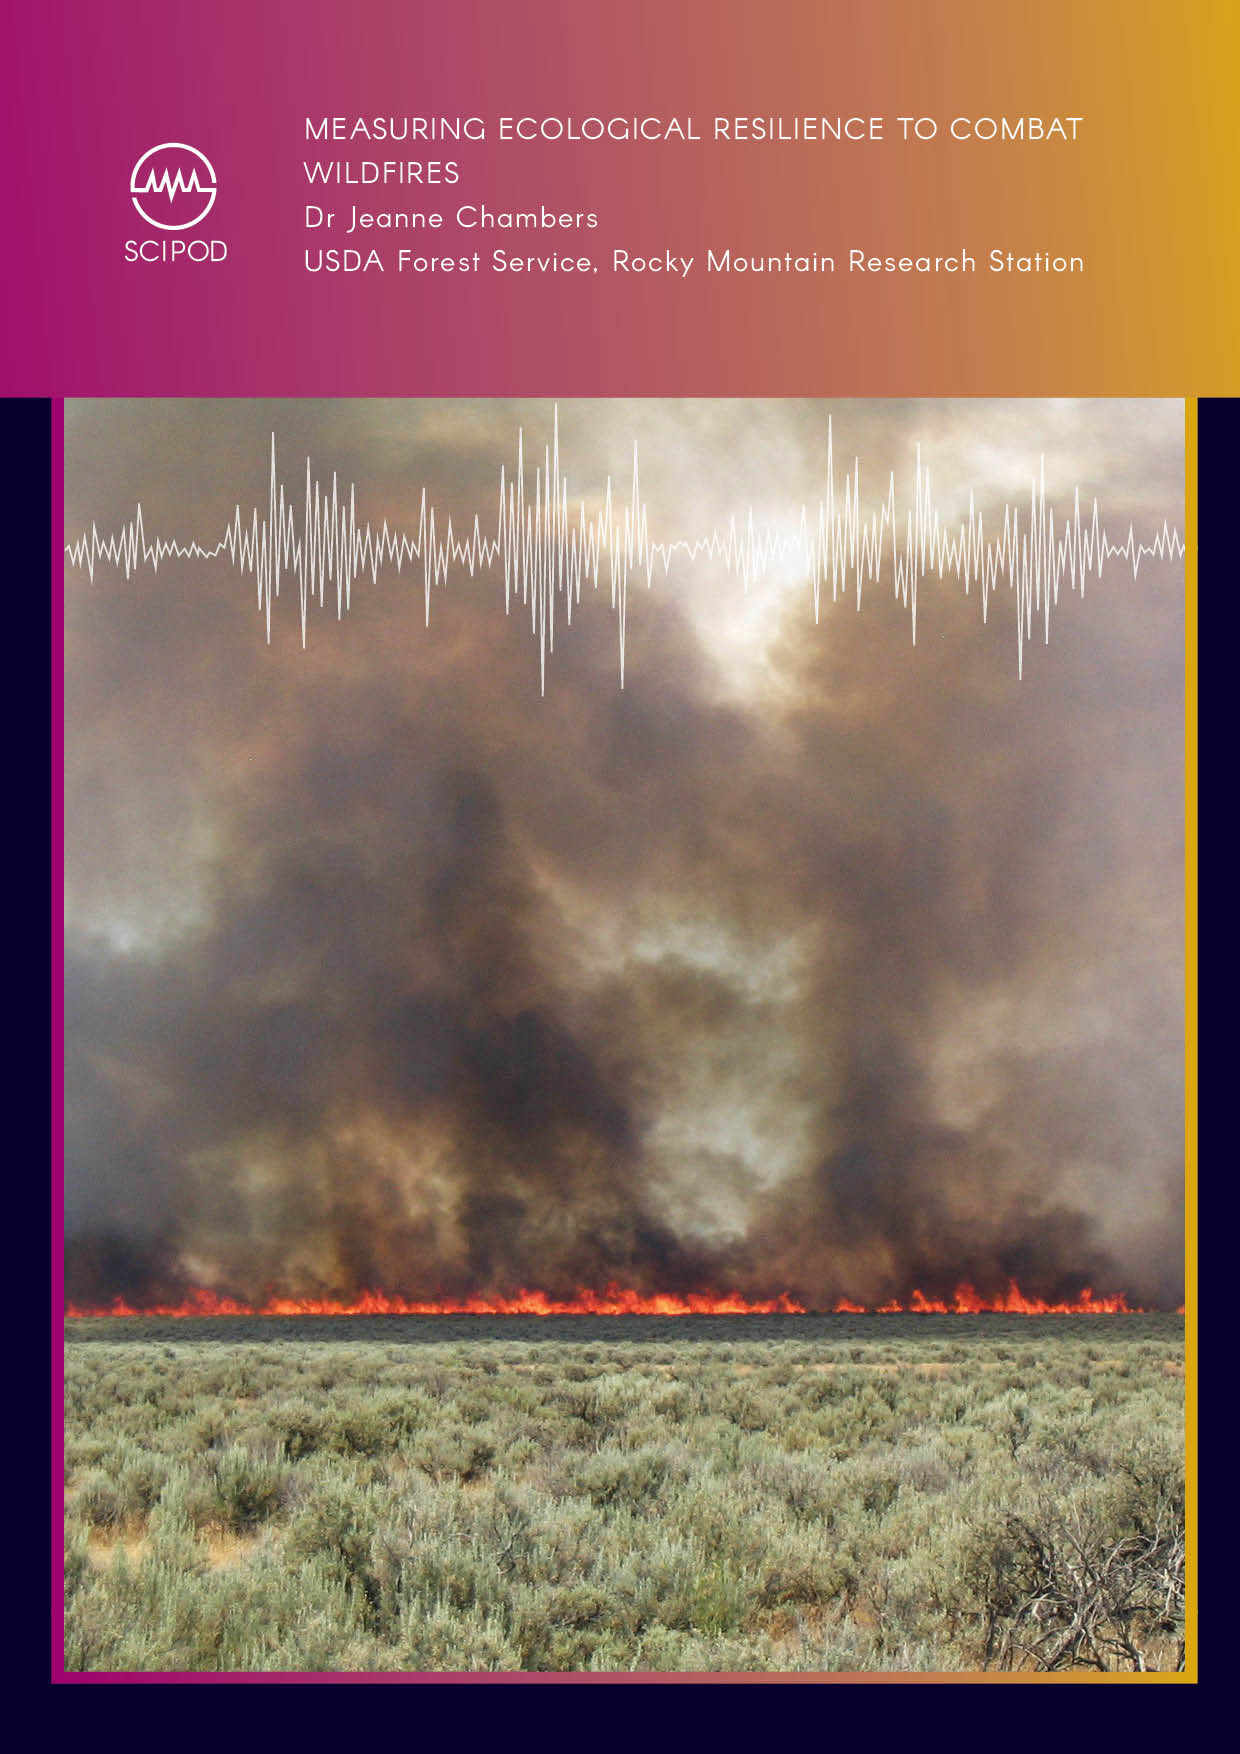 Dr Jeanne Chambers – Measuring Ecological Resilience to Combat Wildfires